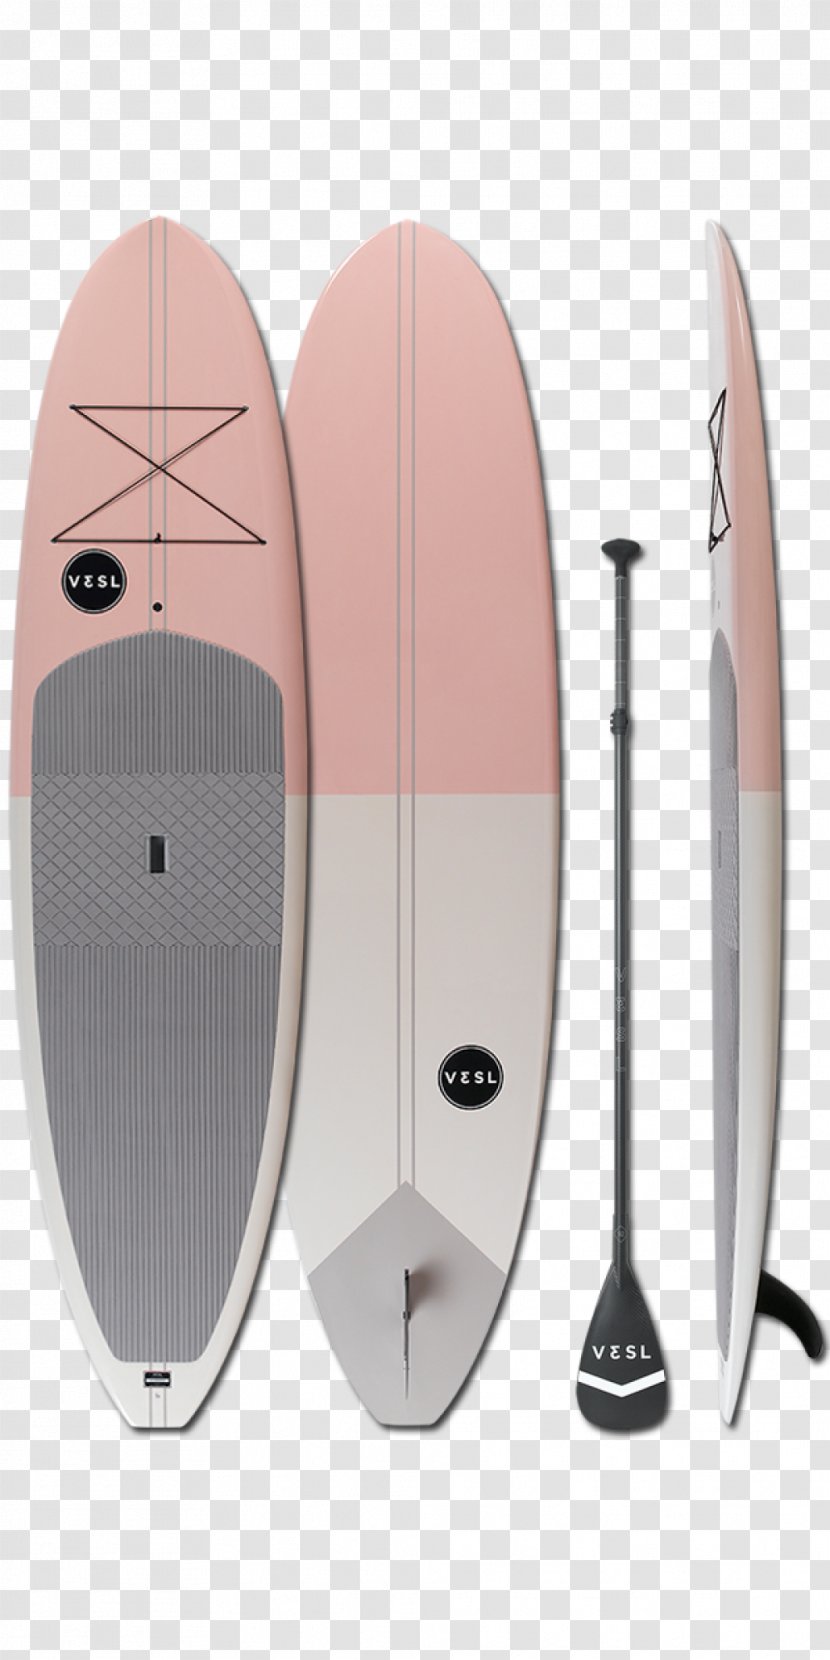 Surfboard Standup Paddleboarding Surfing Sporting Goods - Paddle - Board Transparent PNG